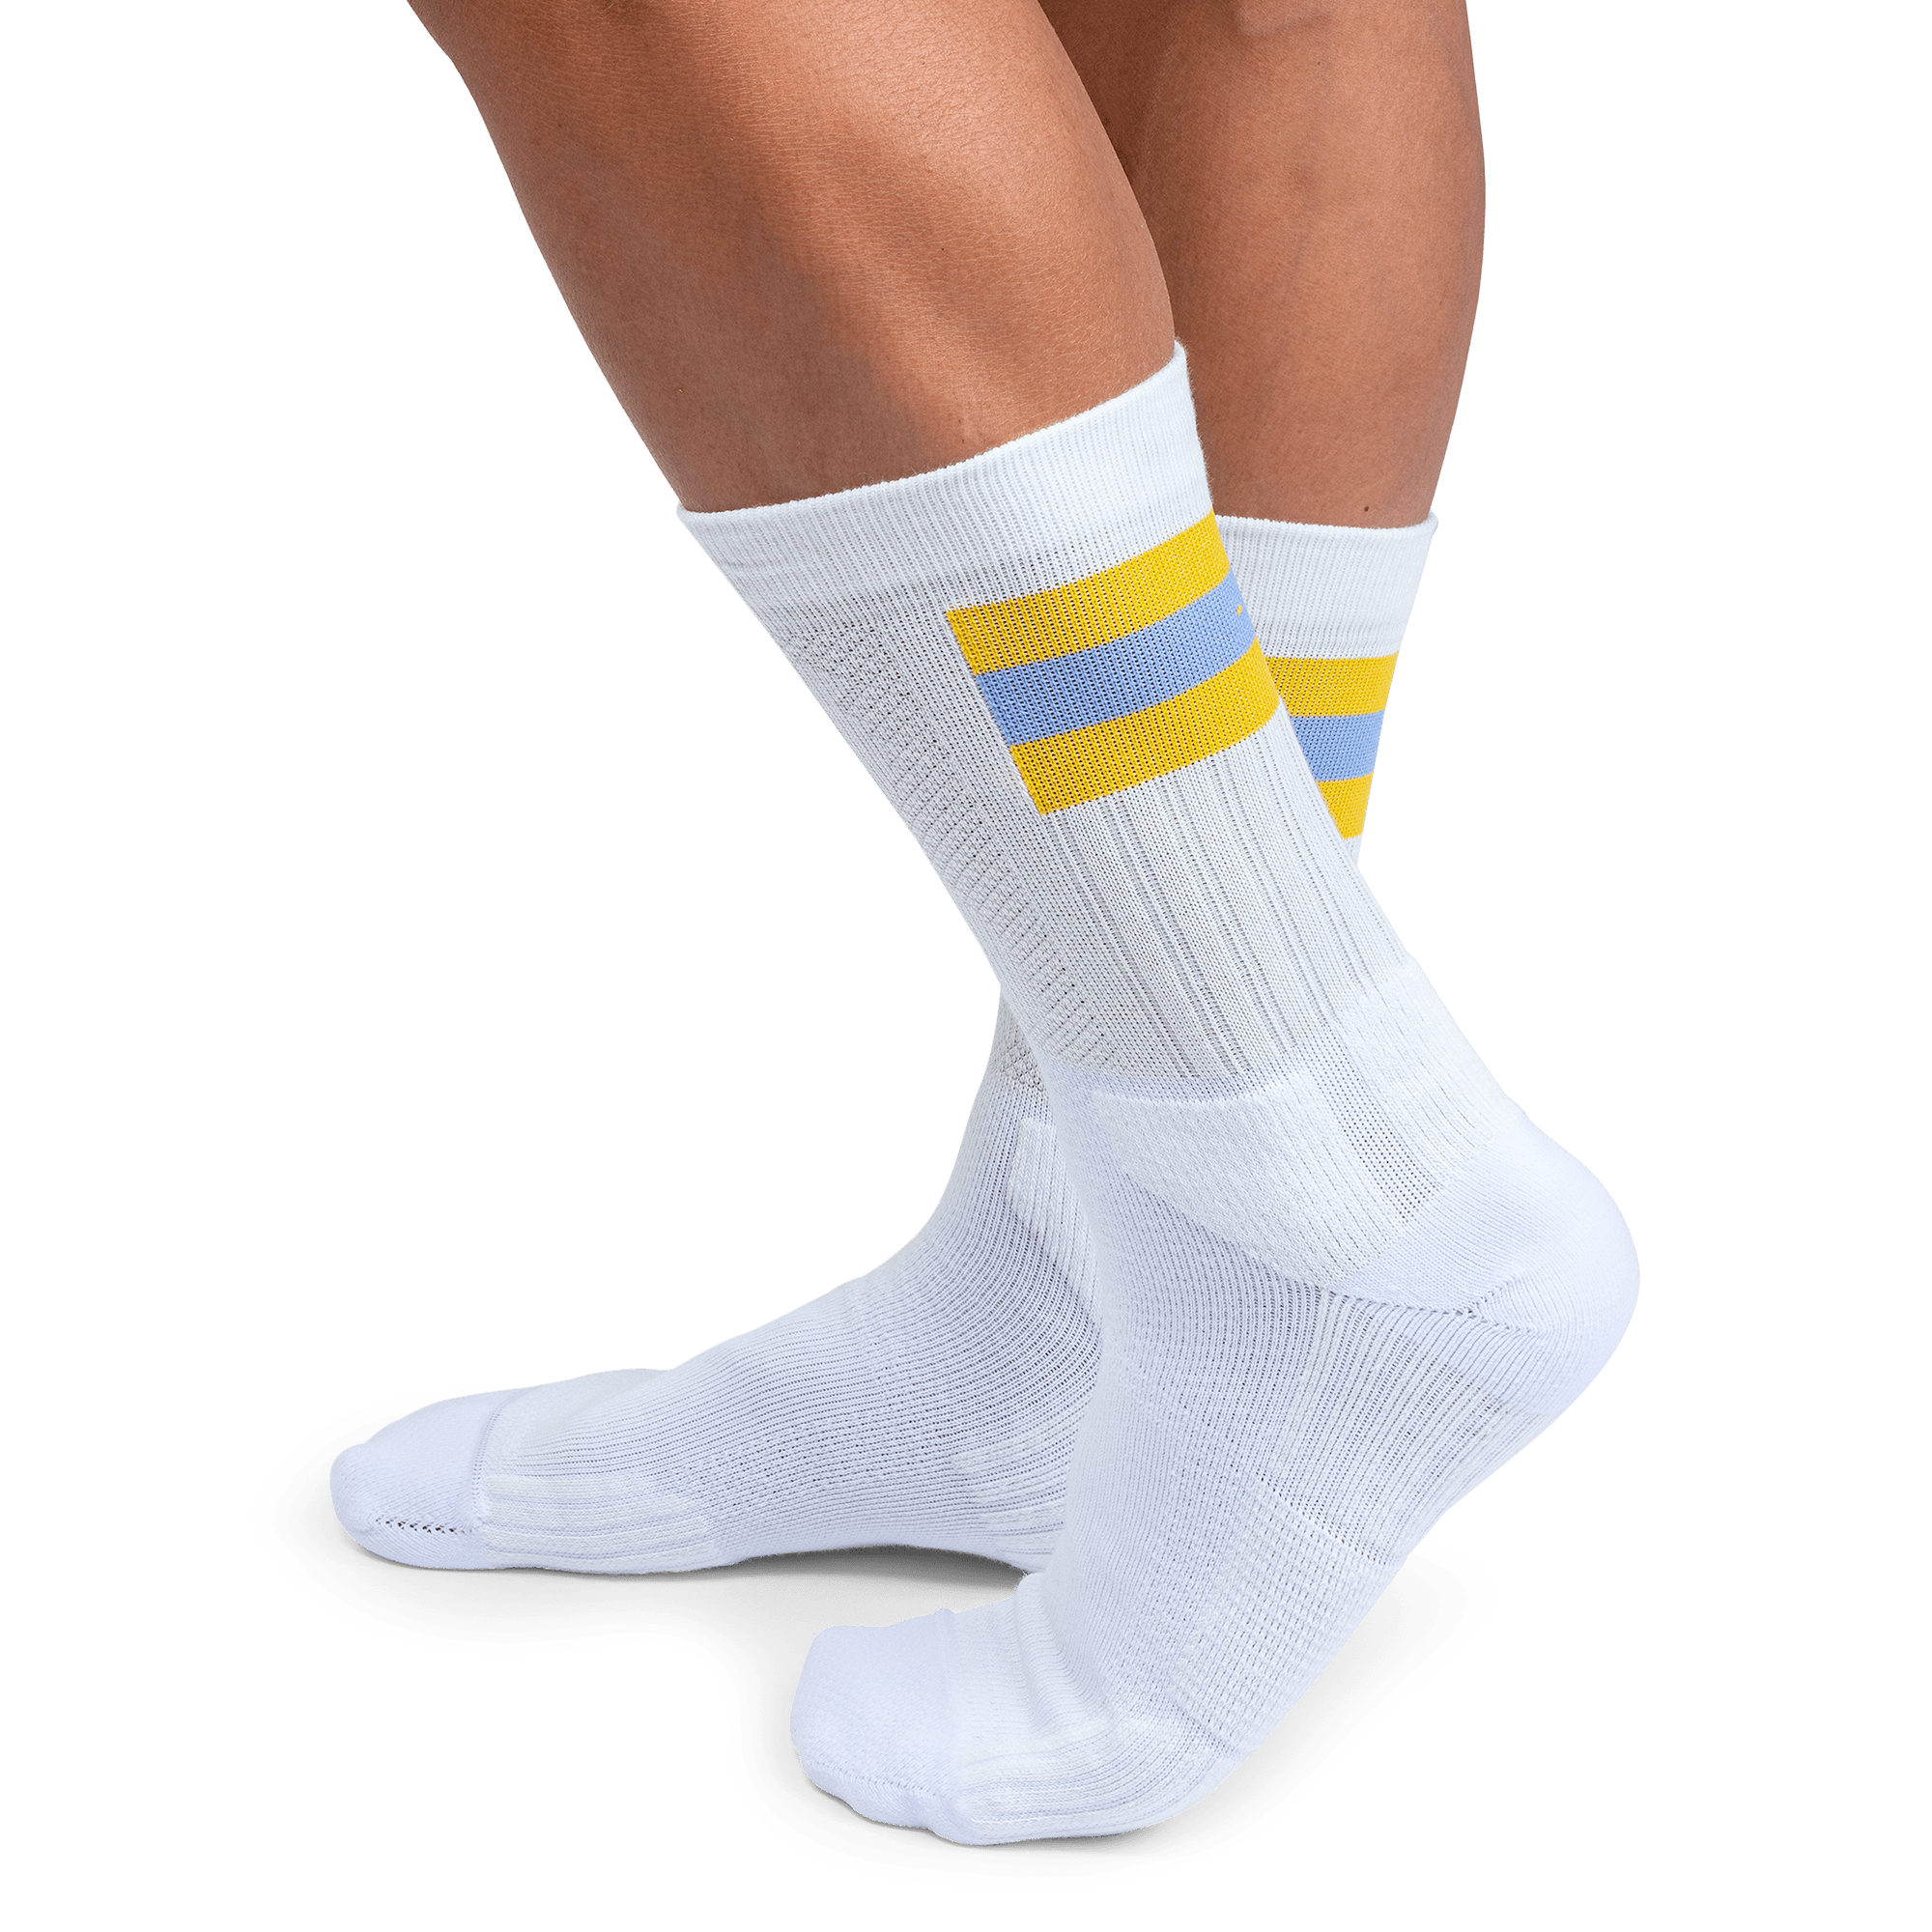 On Chaussettes Running Homme - Performance Mid - Zest & Moss